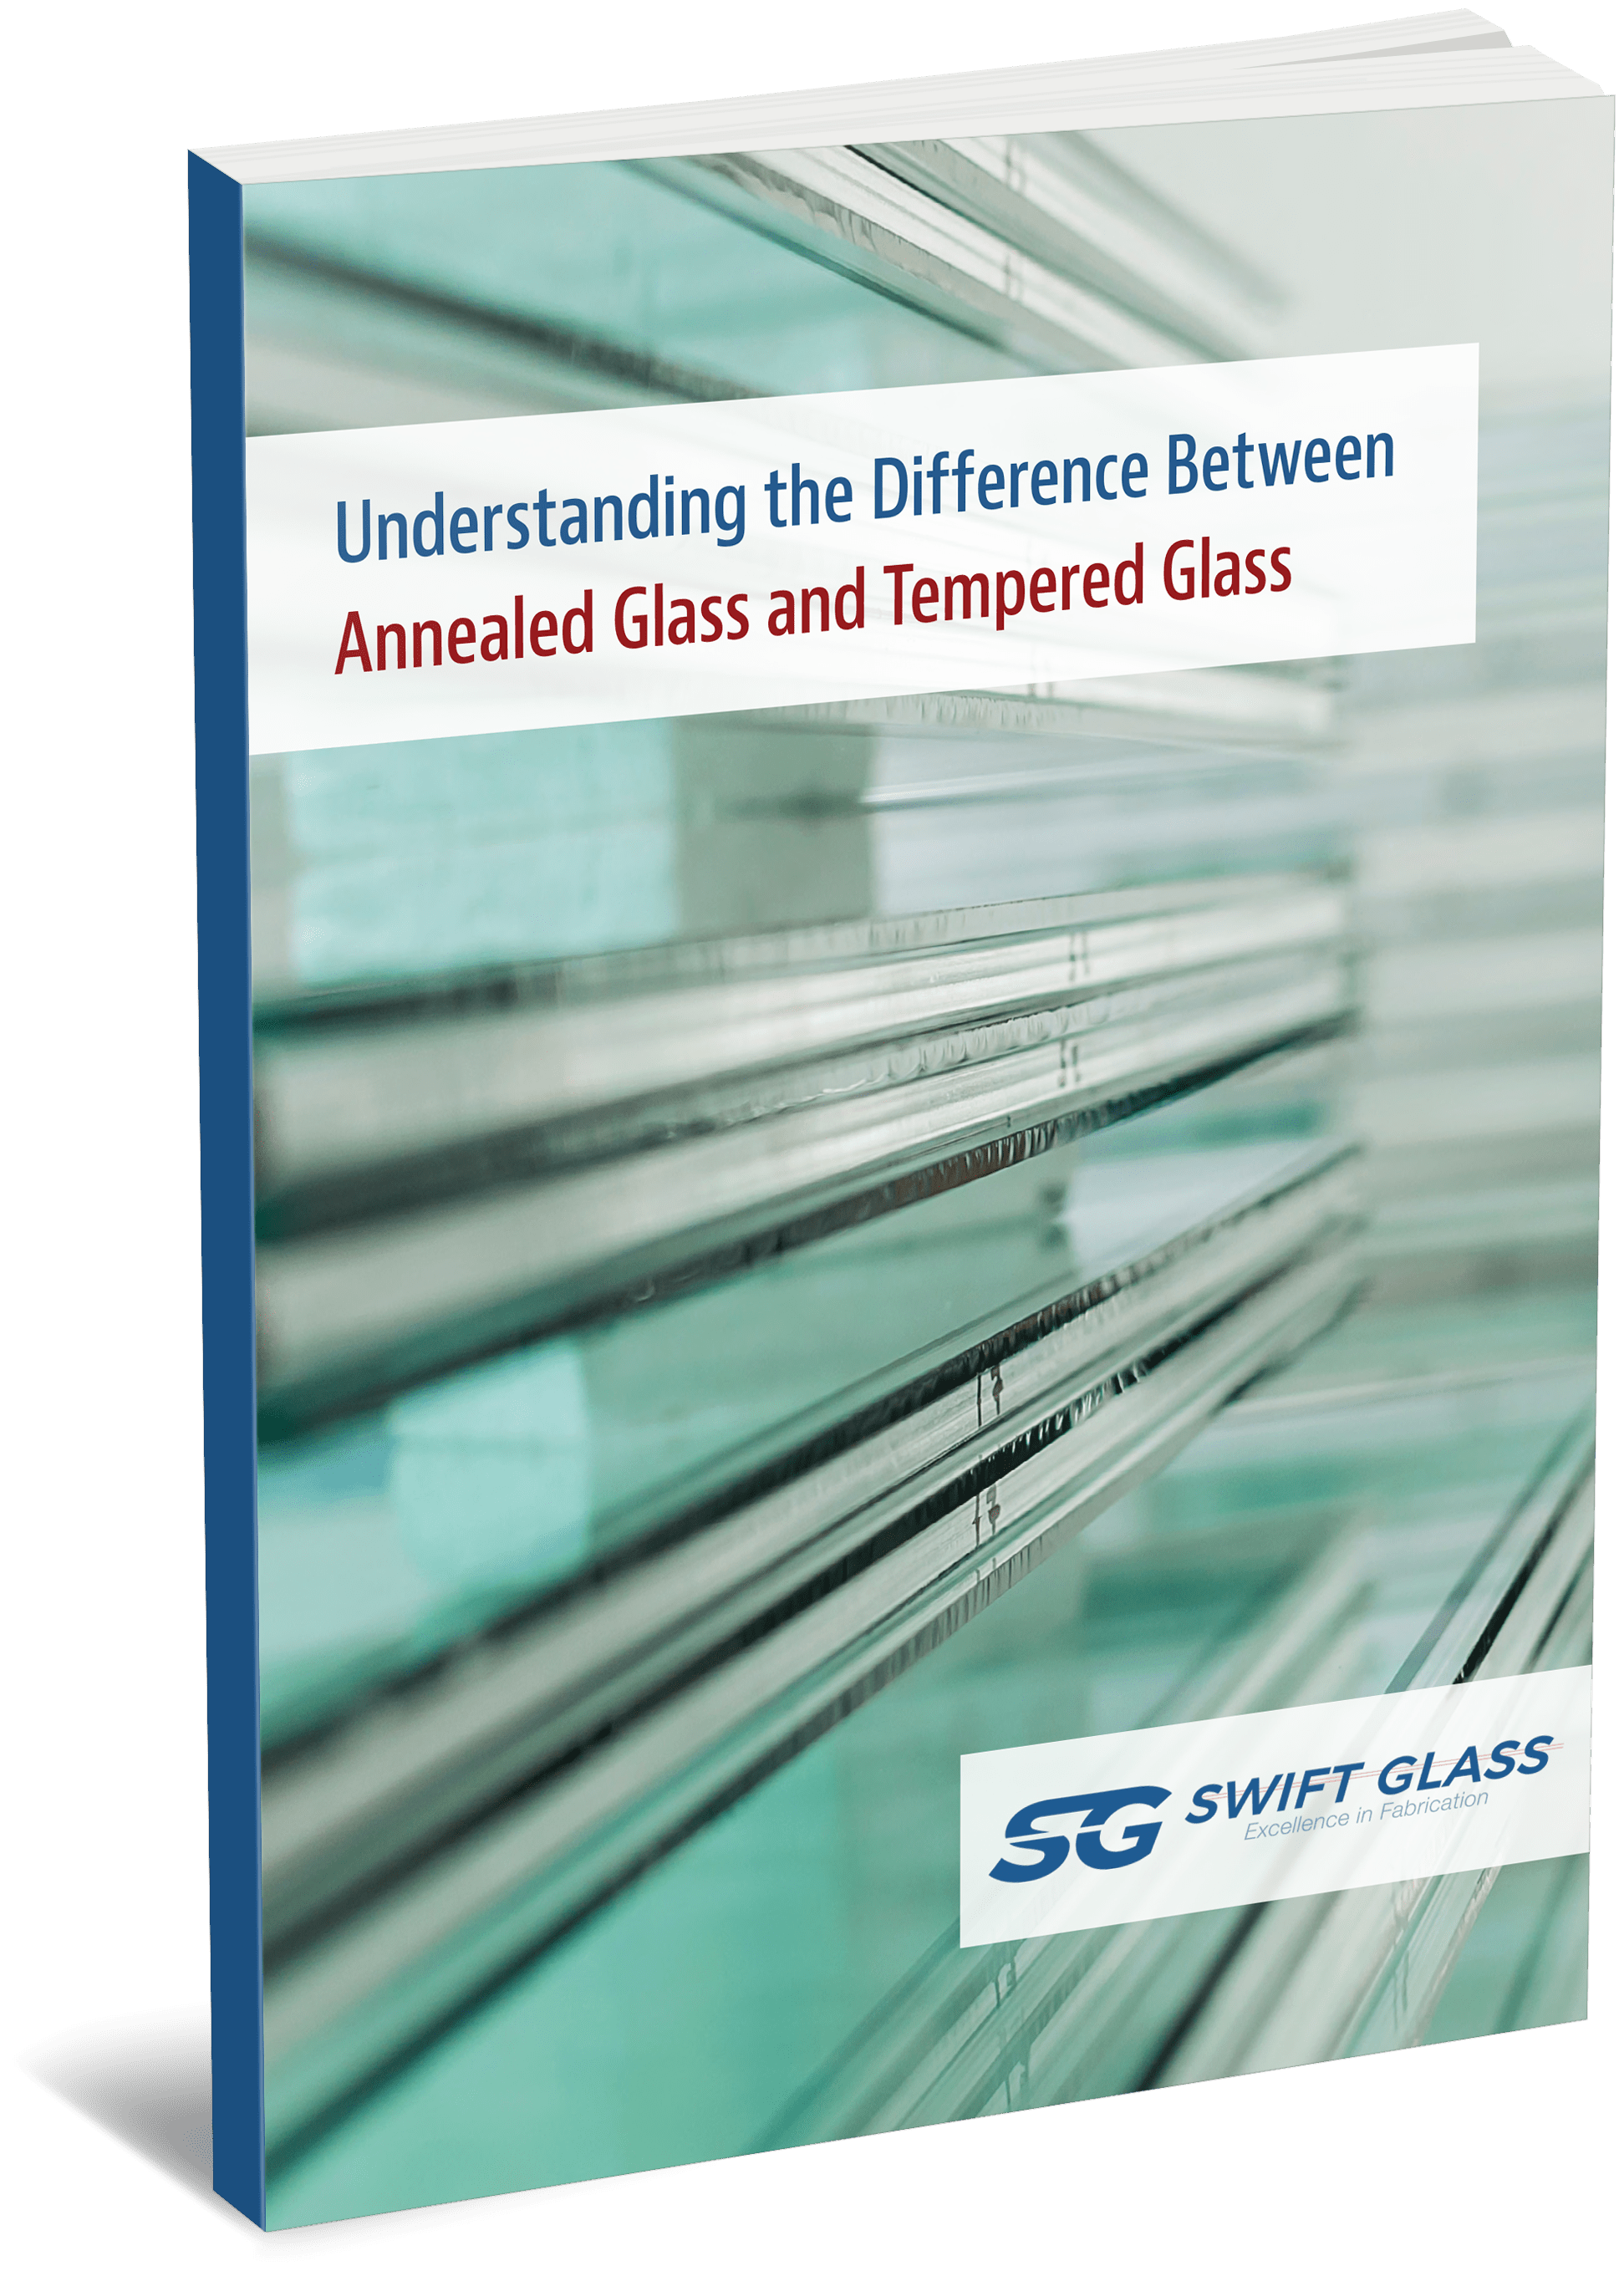 Understanding the Difference Between Annealed Glass and Tempered Glass